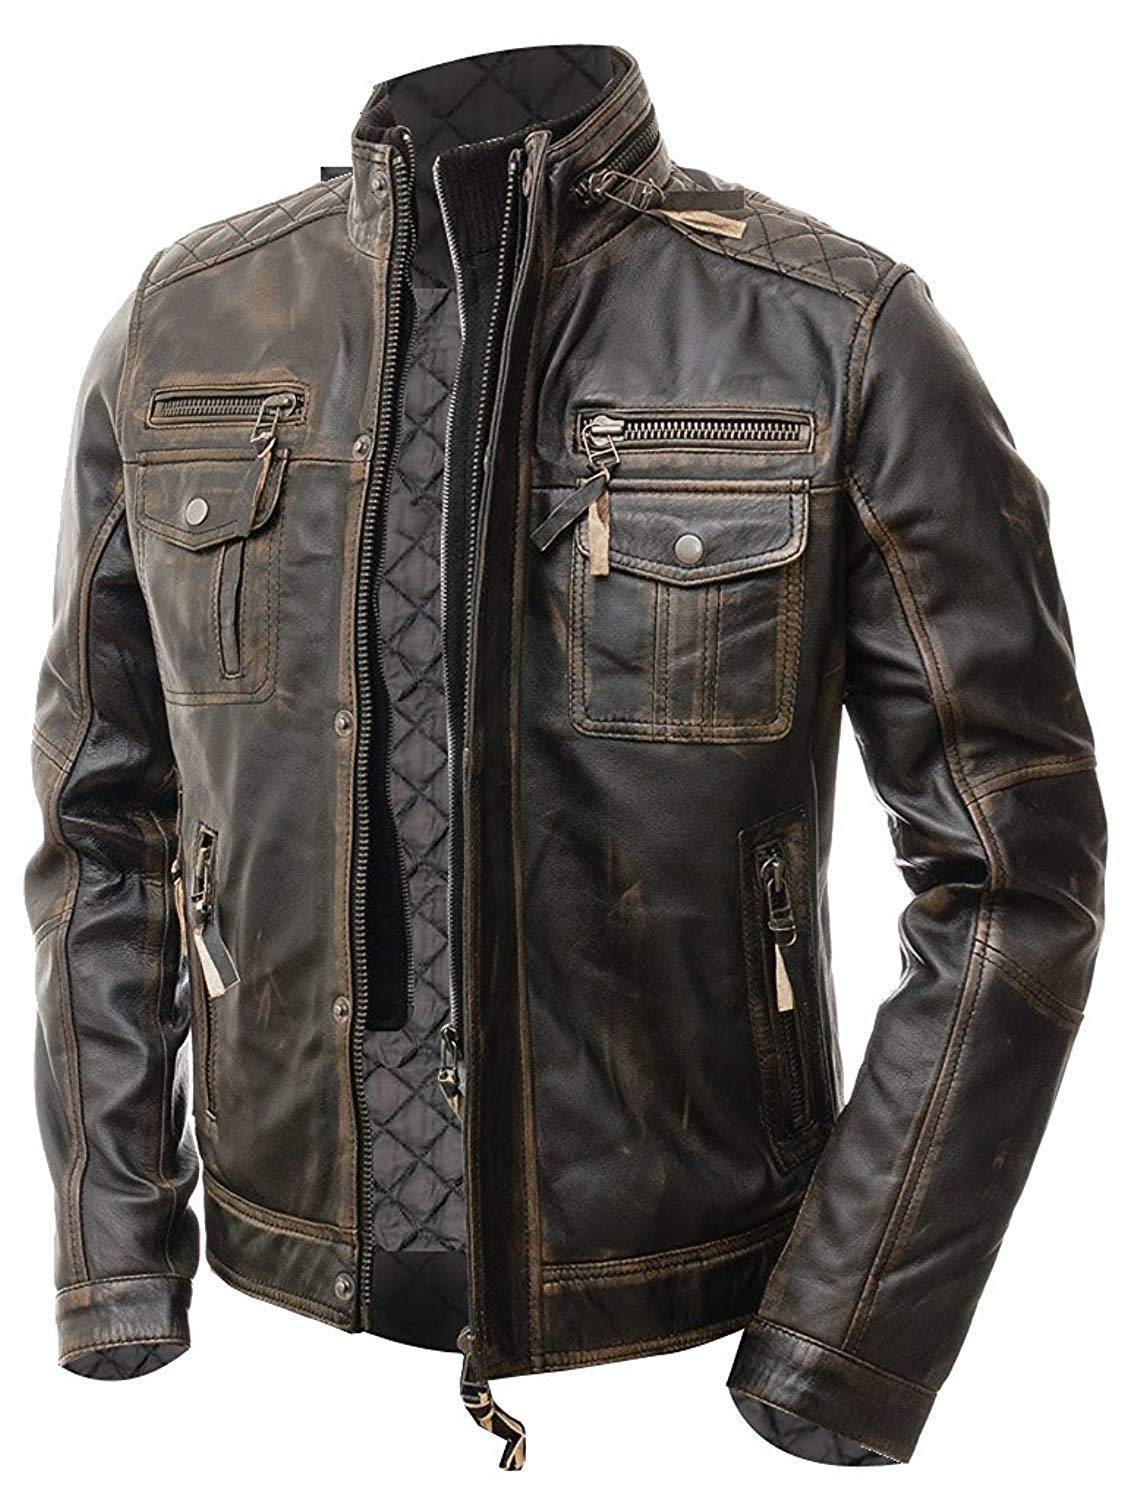 Brown Leather Jacket Mens Cafe Racer Real Lambskin Leather Distressed Motorcycle Jacket